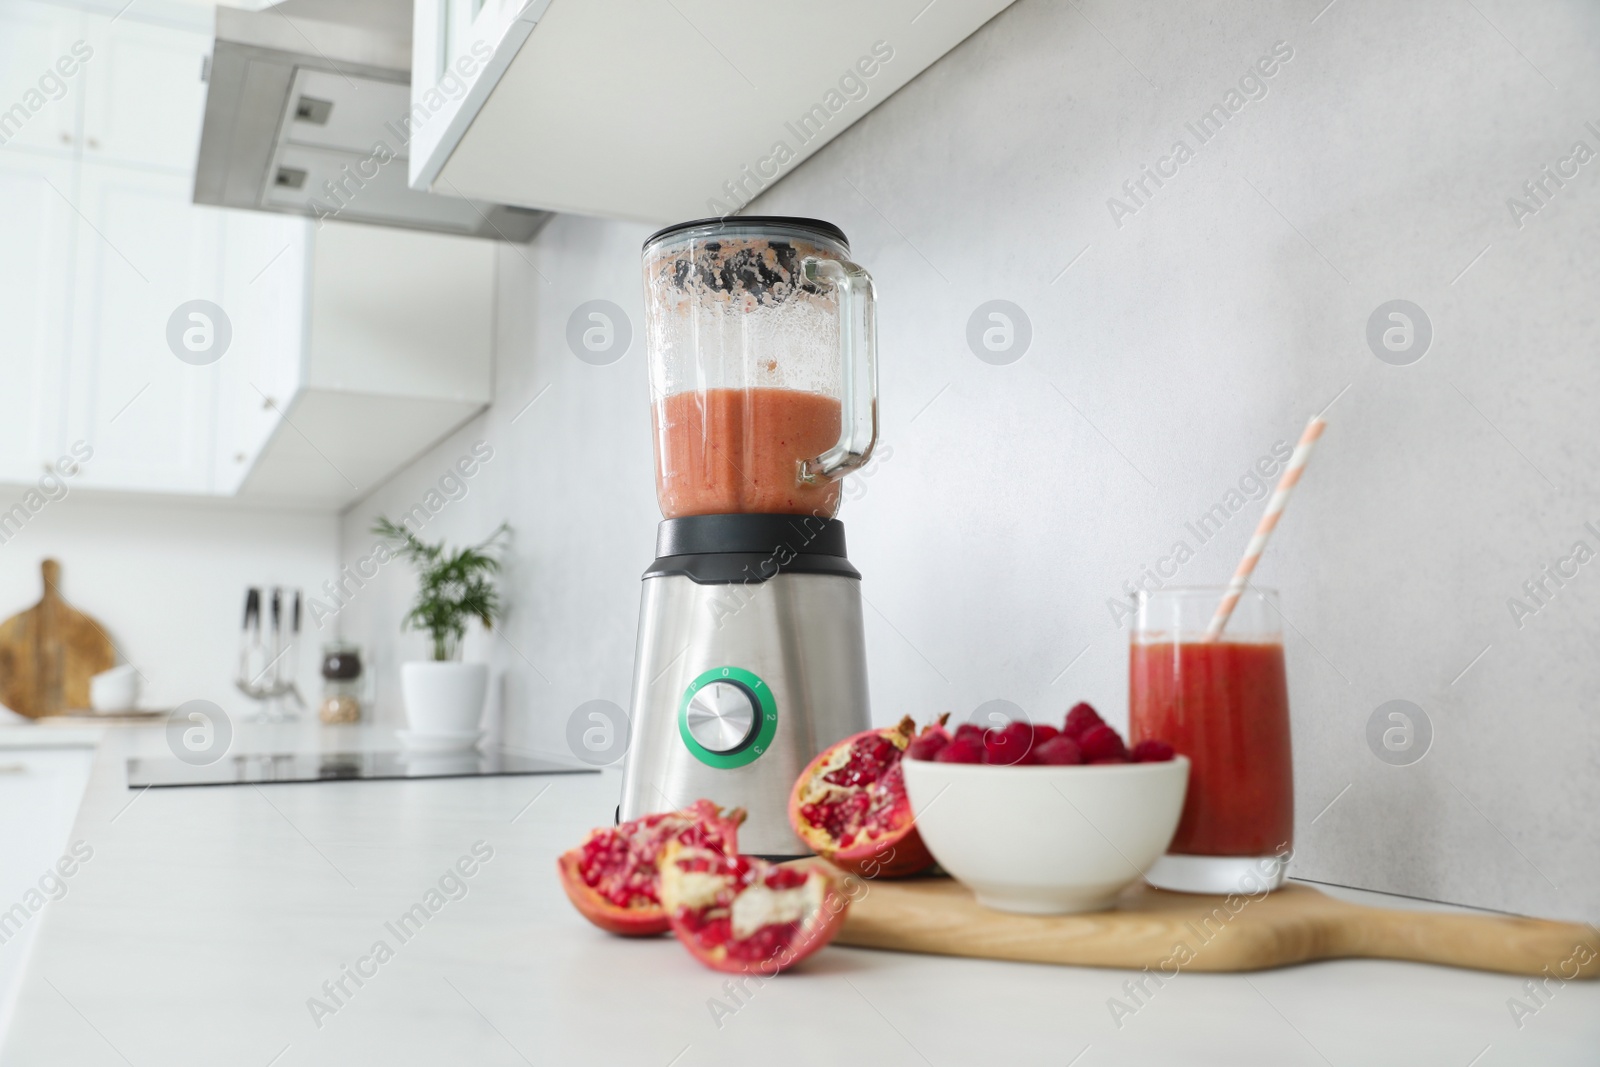 Photo of Blender and smoothie ingredients on white countertop in kitchen. Space for text